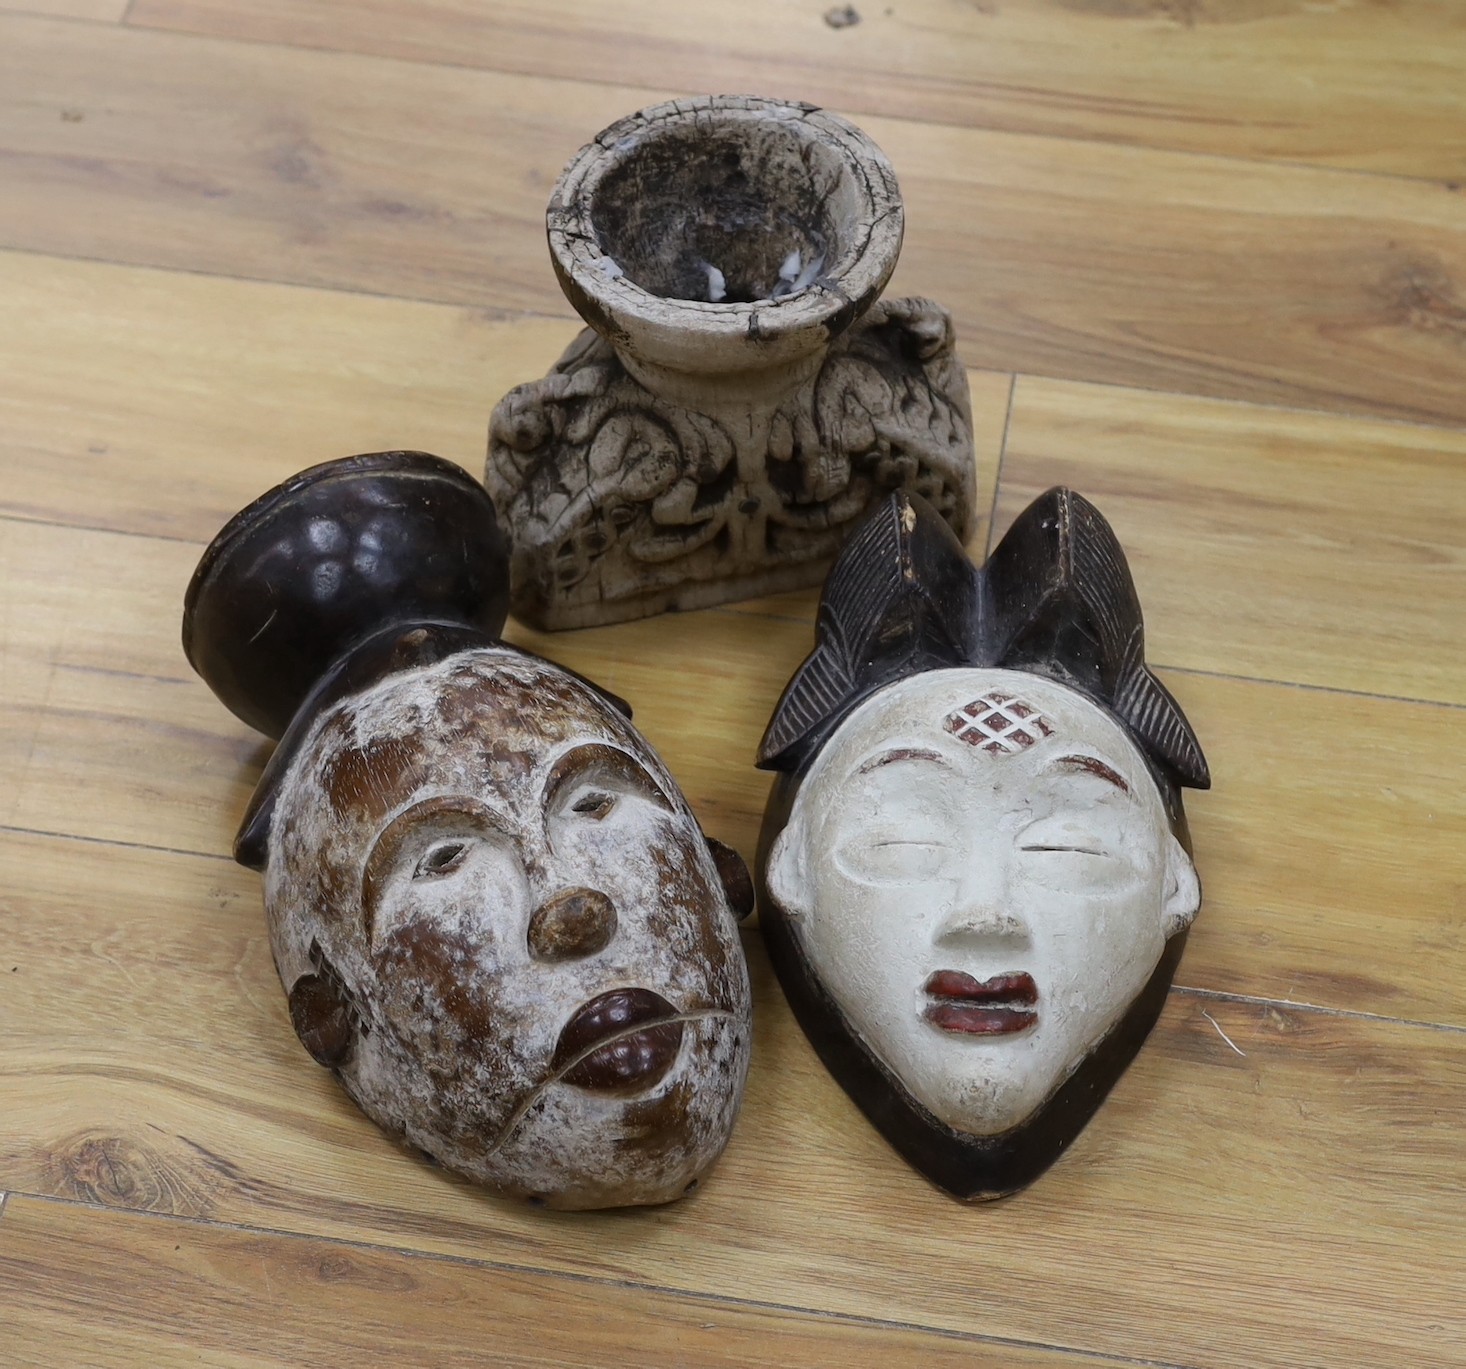 The Two African masks and another carving, tallest mask 30cm high